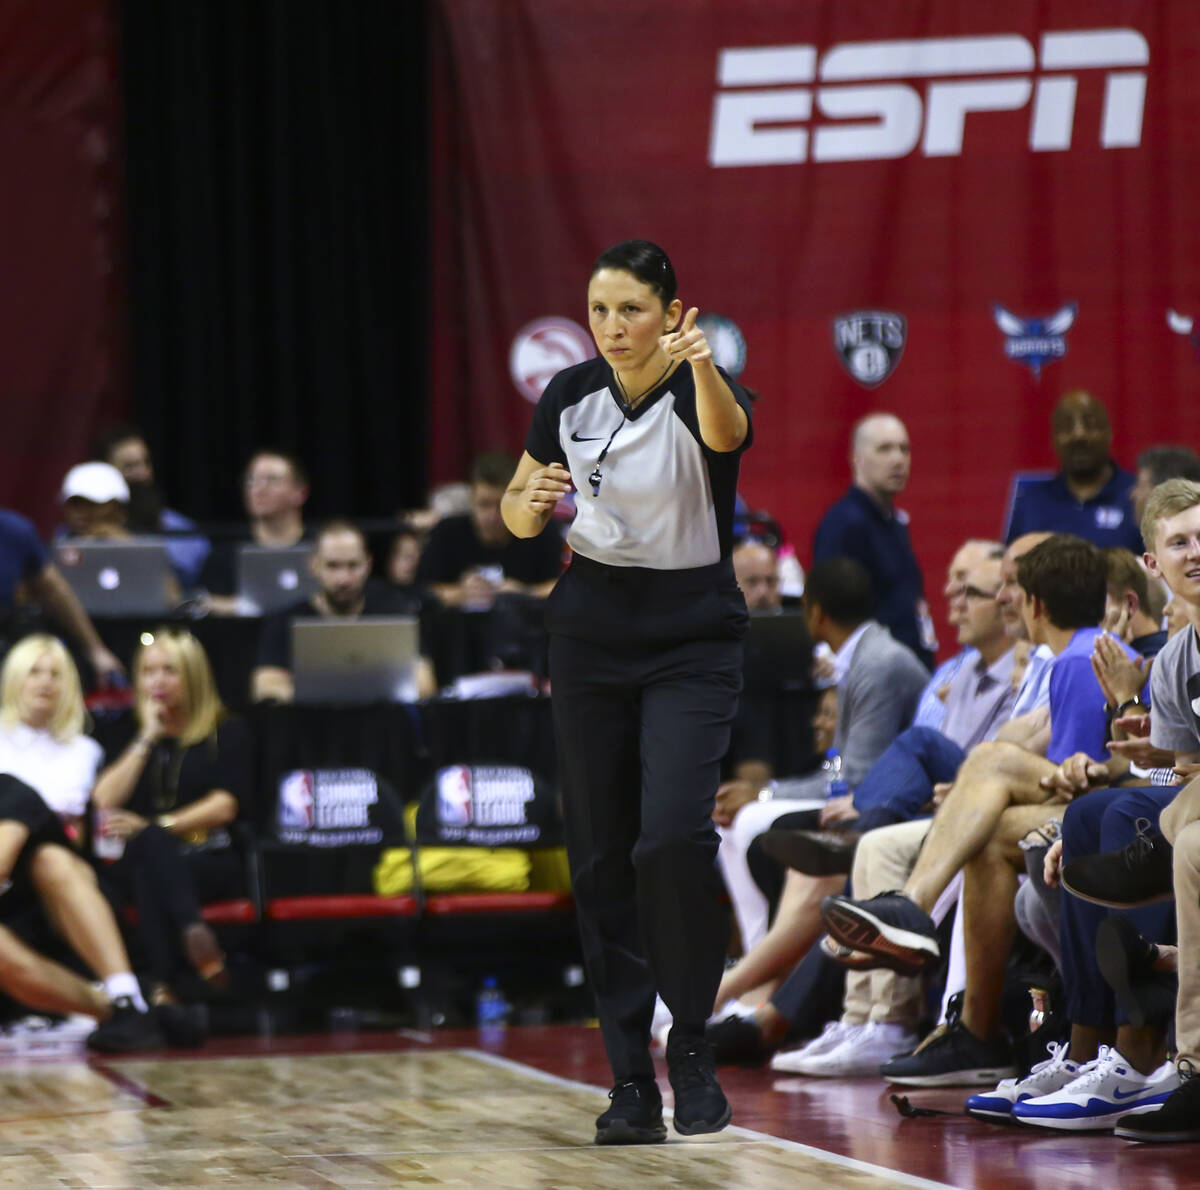 Referee Hortencia Sanchez-Carrizales motions while officiating a game between Phoenix Suns and ...